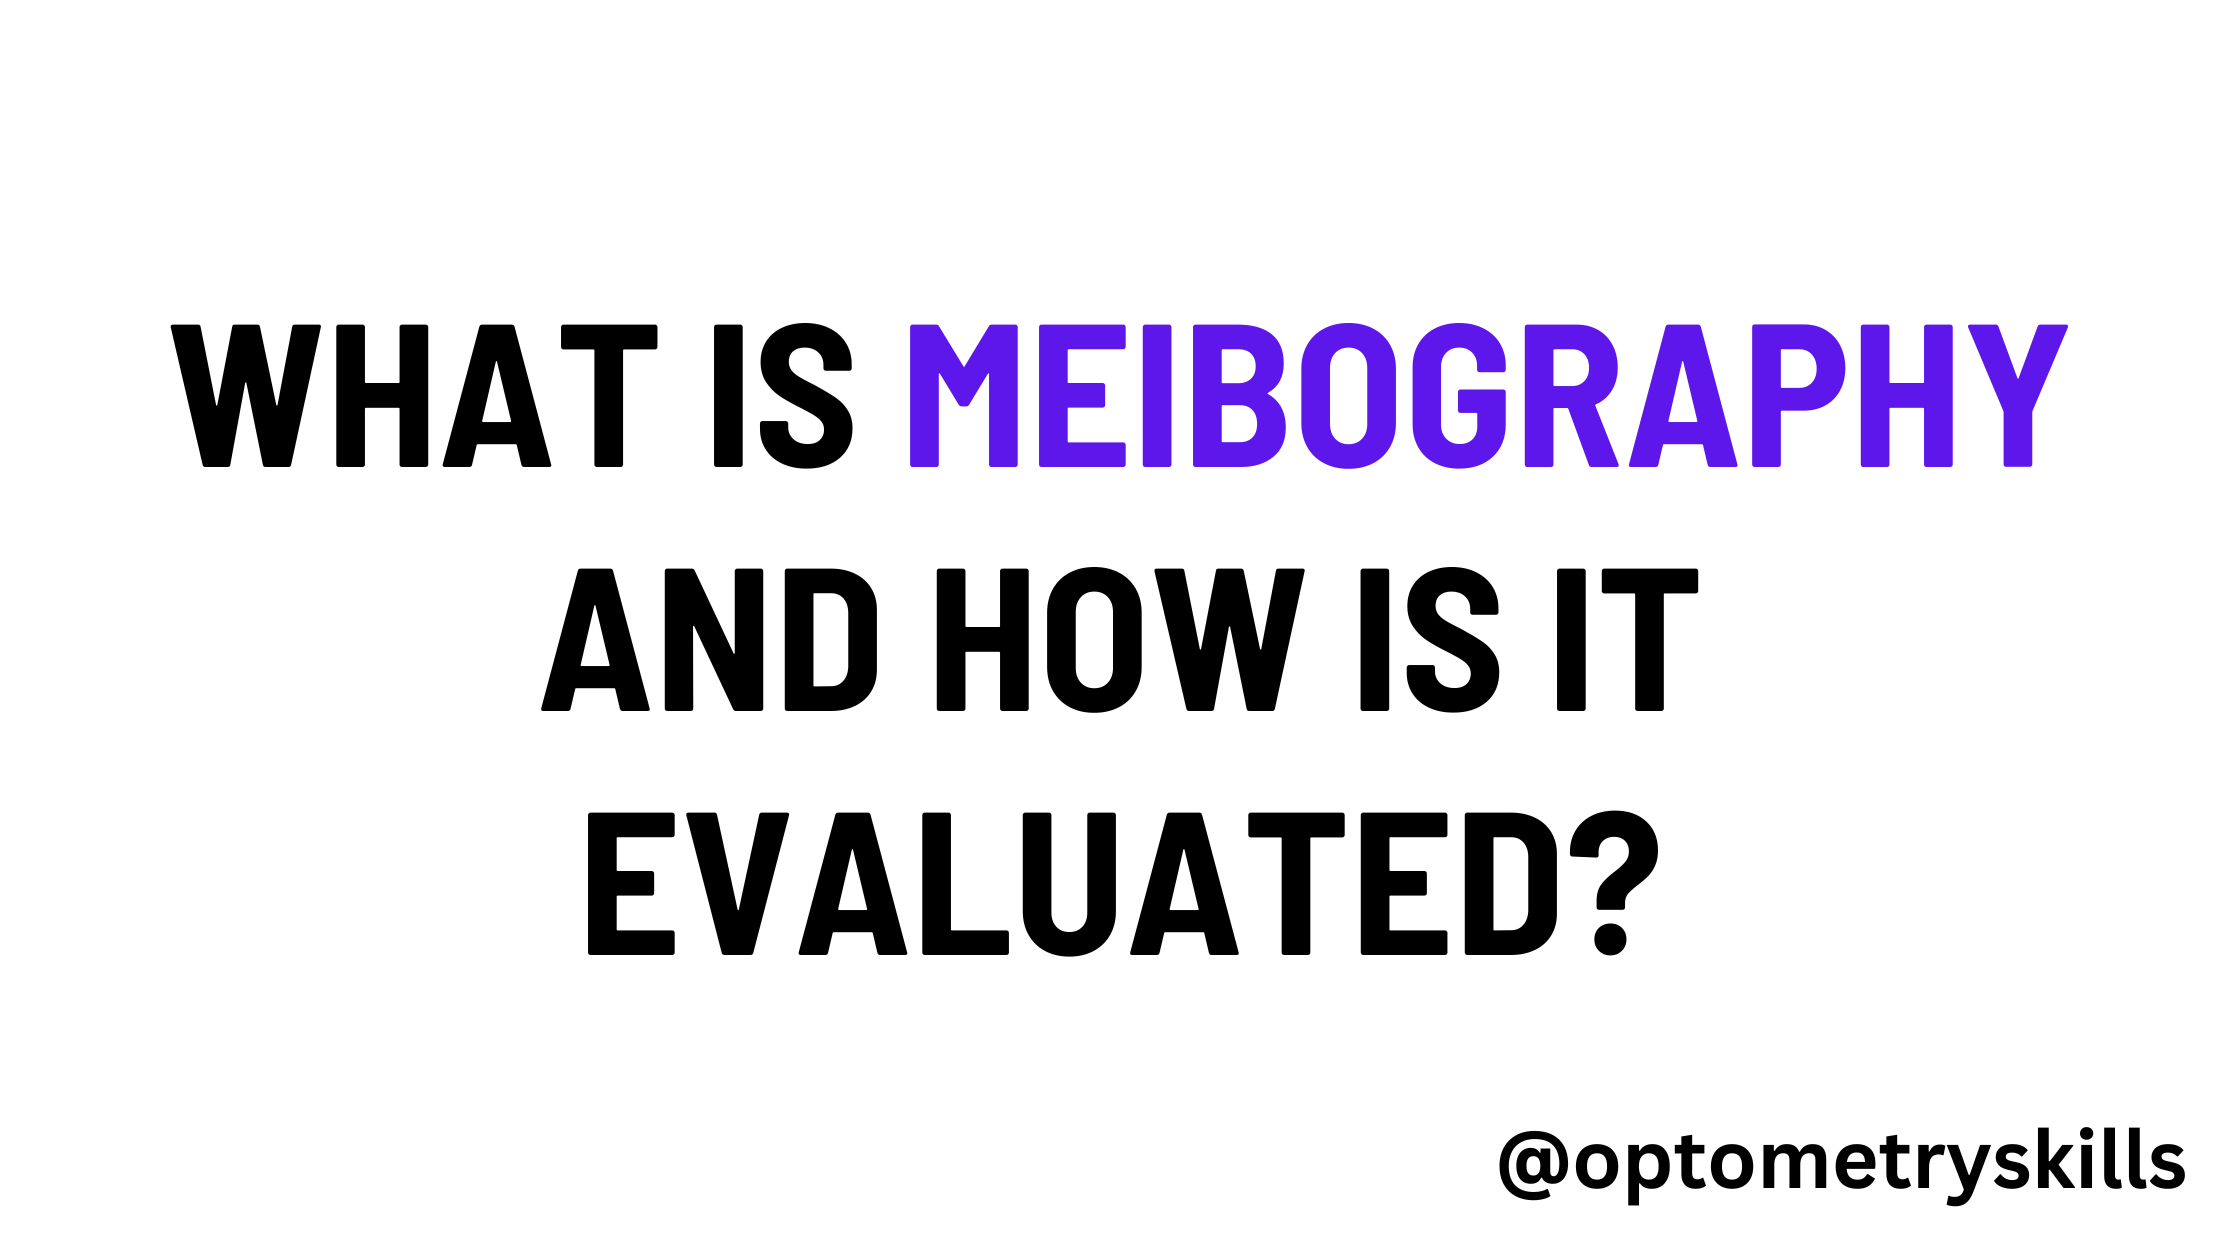 What is Meibography and how is it evaluated?